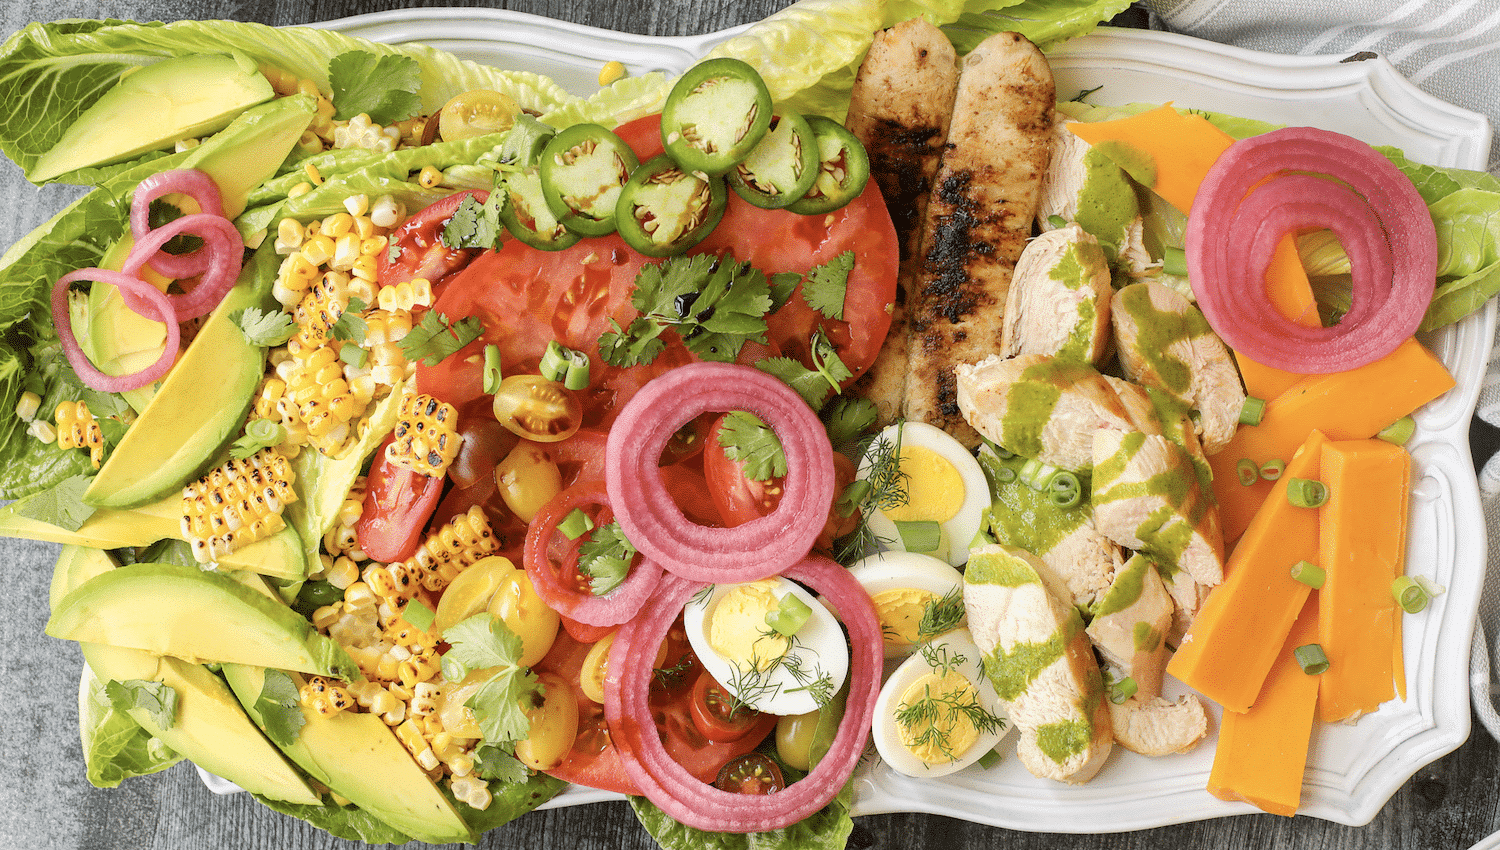 Cobb Salad with Cilantro Lime Dressing – Healthyish Foods